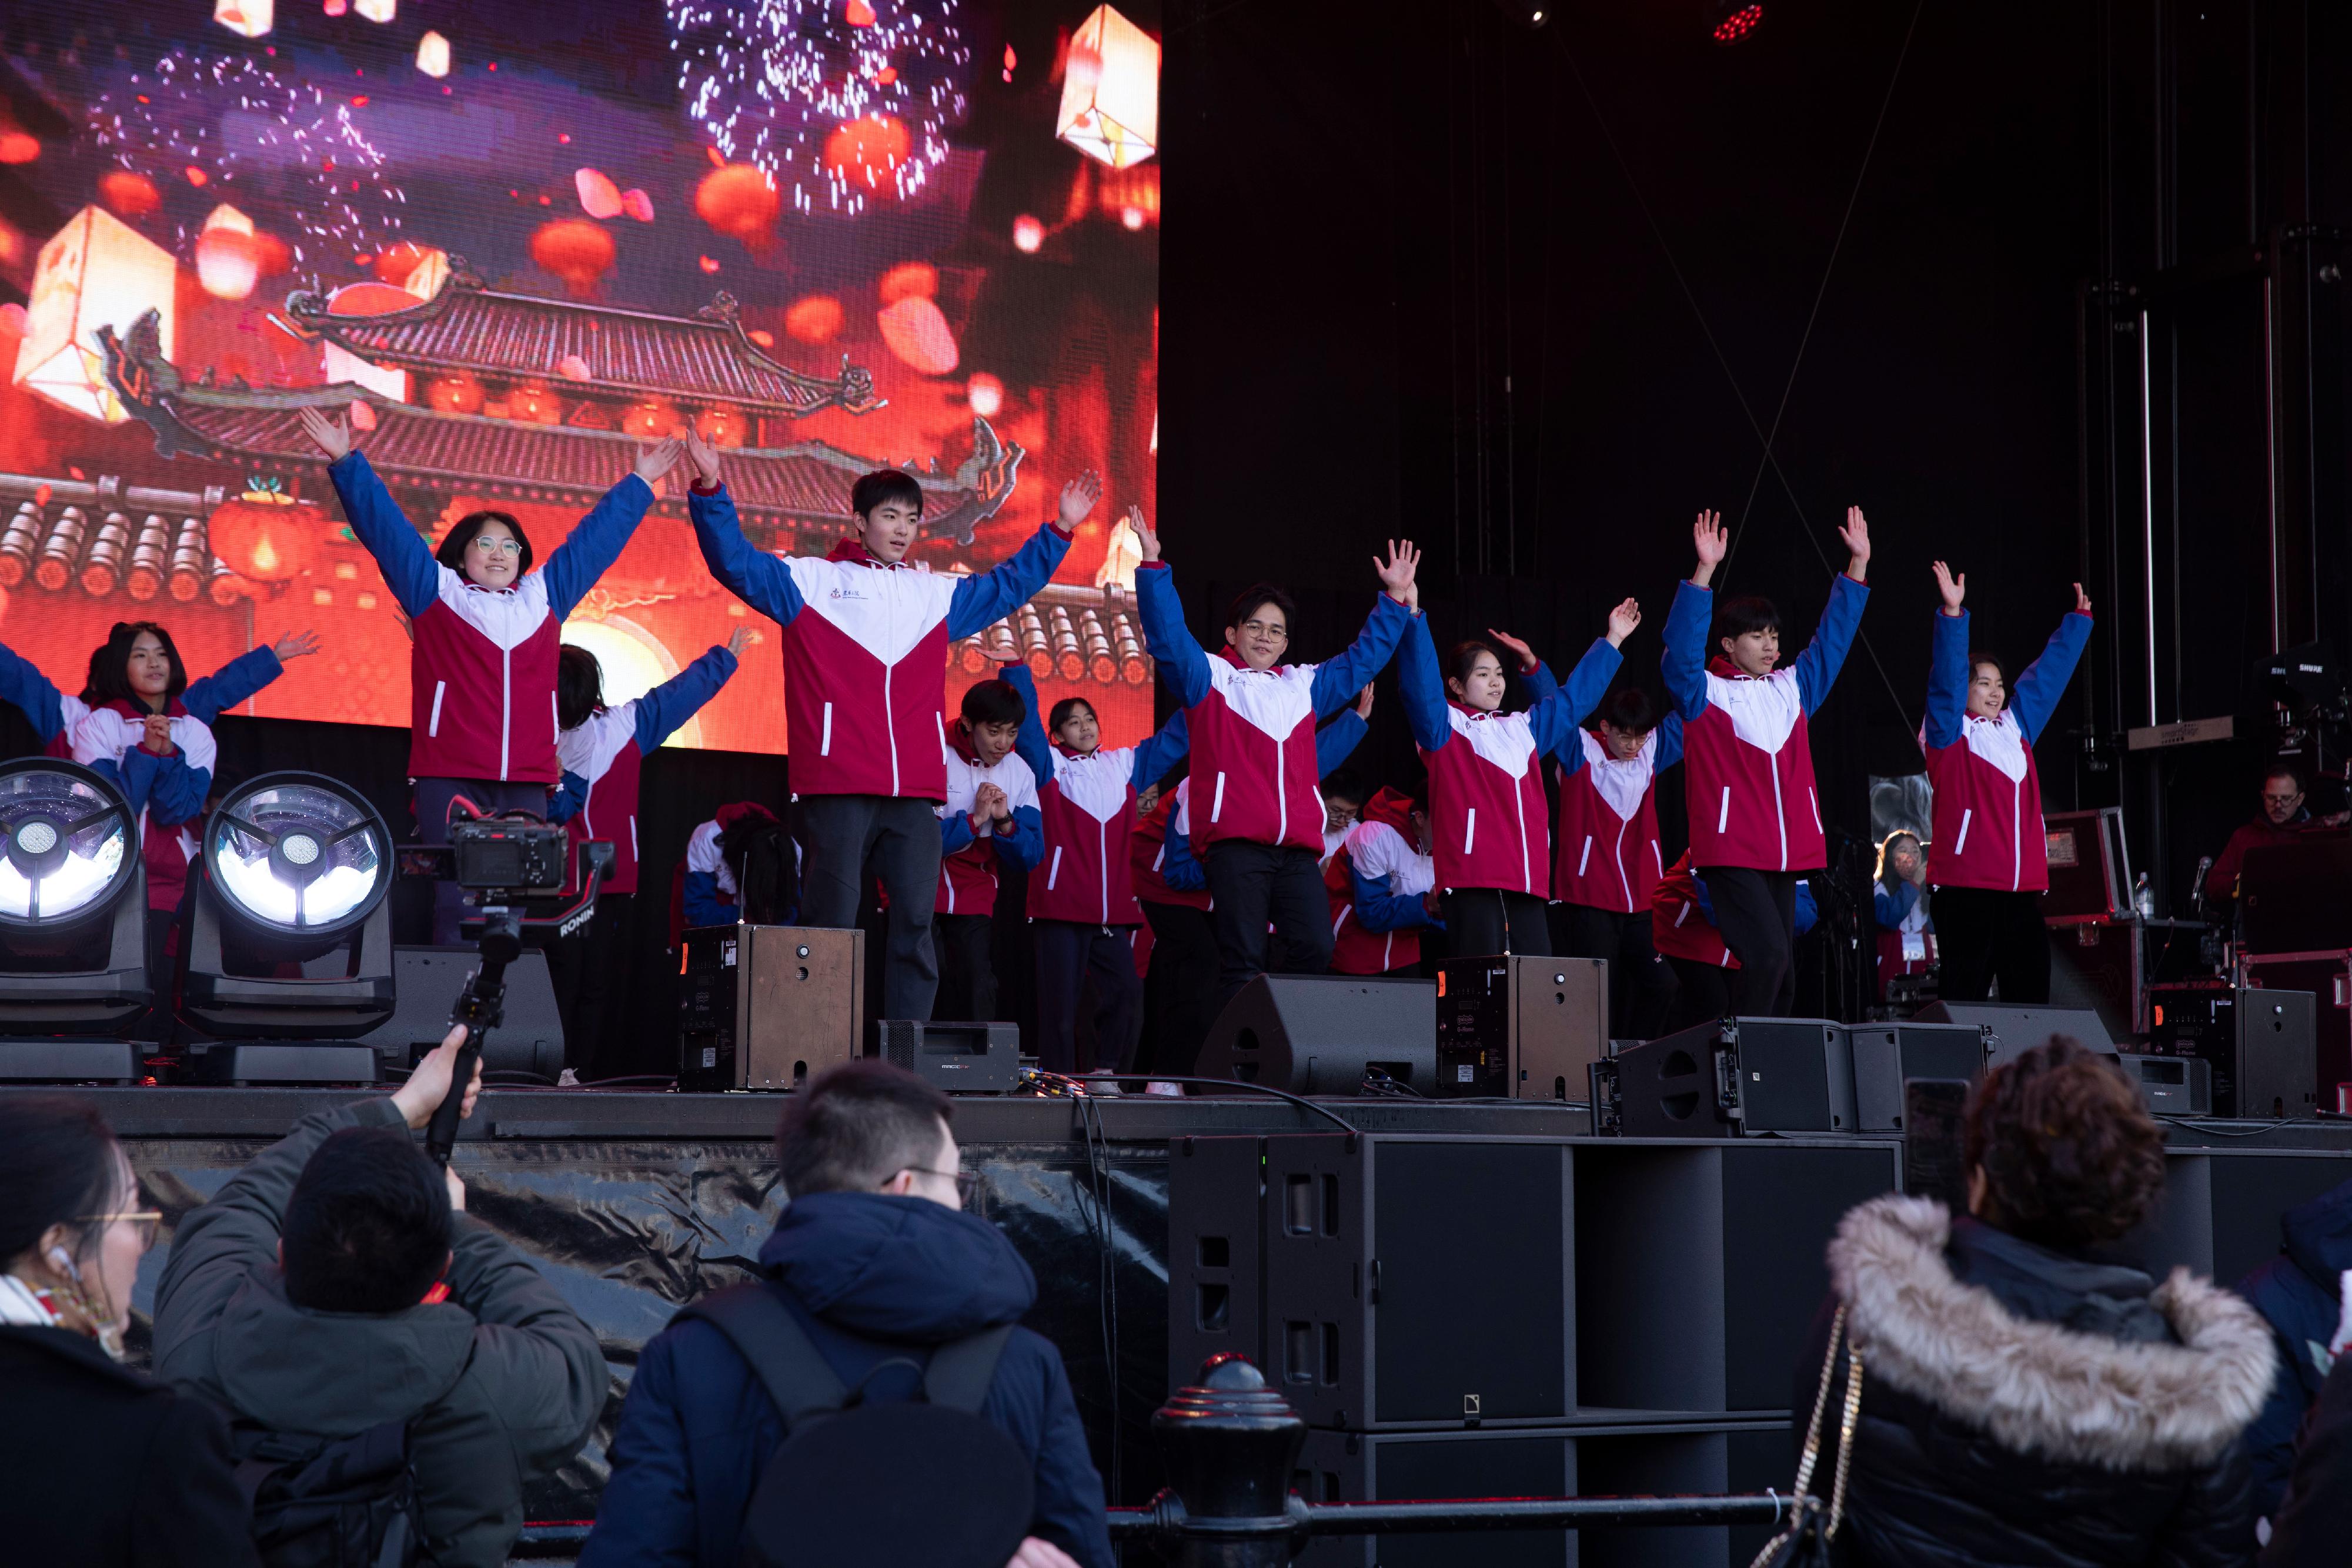 The Hong Kong Economic and Trade Office, London participated in a large-scale London Chinatown celebration in Trafalgar Square, Chinatown and Charing Cross Road on January 22 (London time). Photo shows the lively dance performance presented by student ambassadors of the Tung Wah Group of Hospitals from Hong Kong.